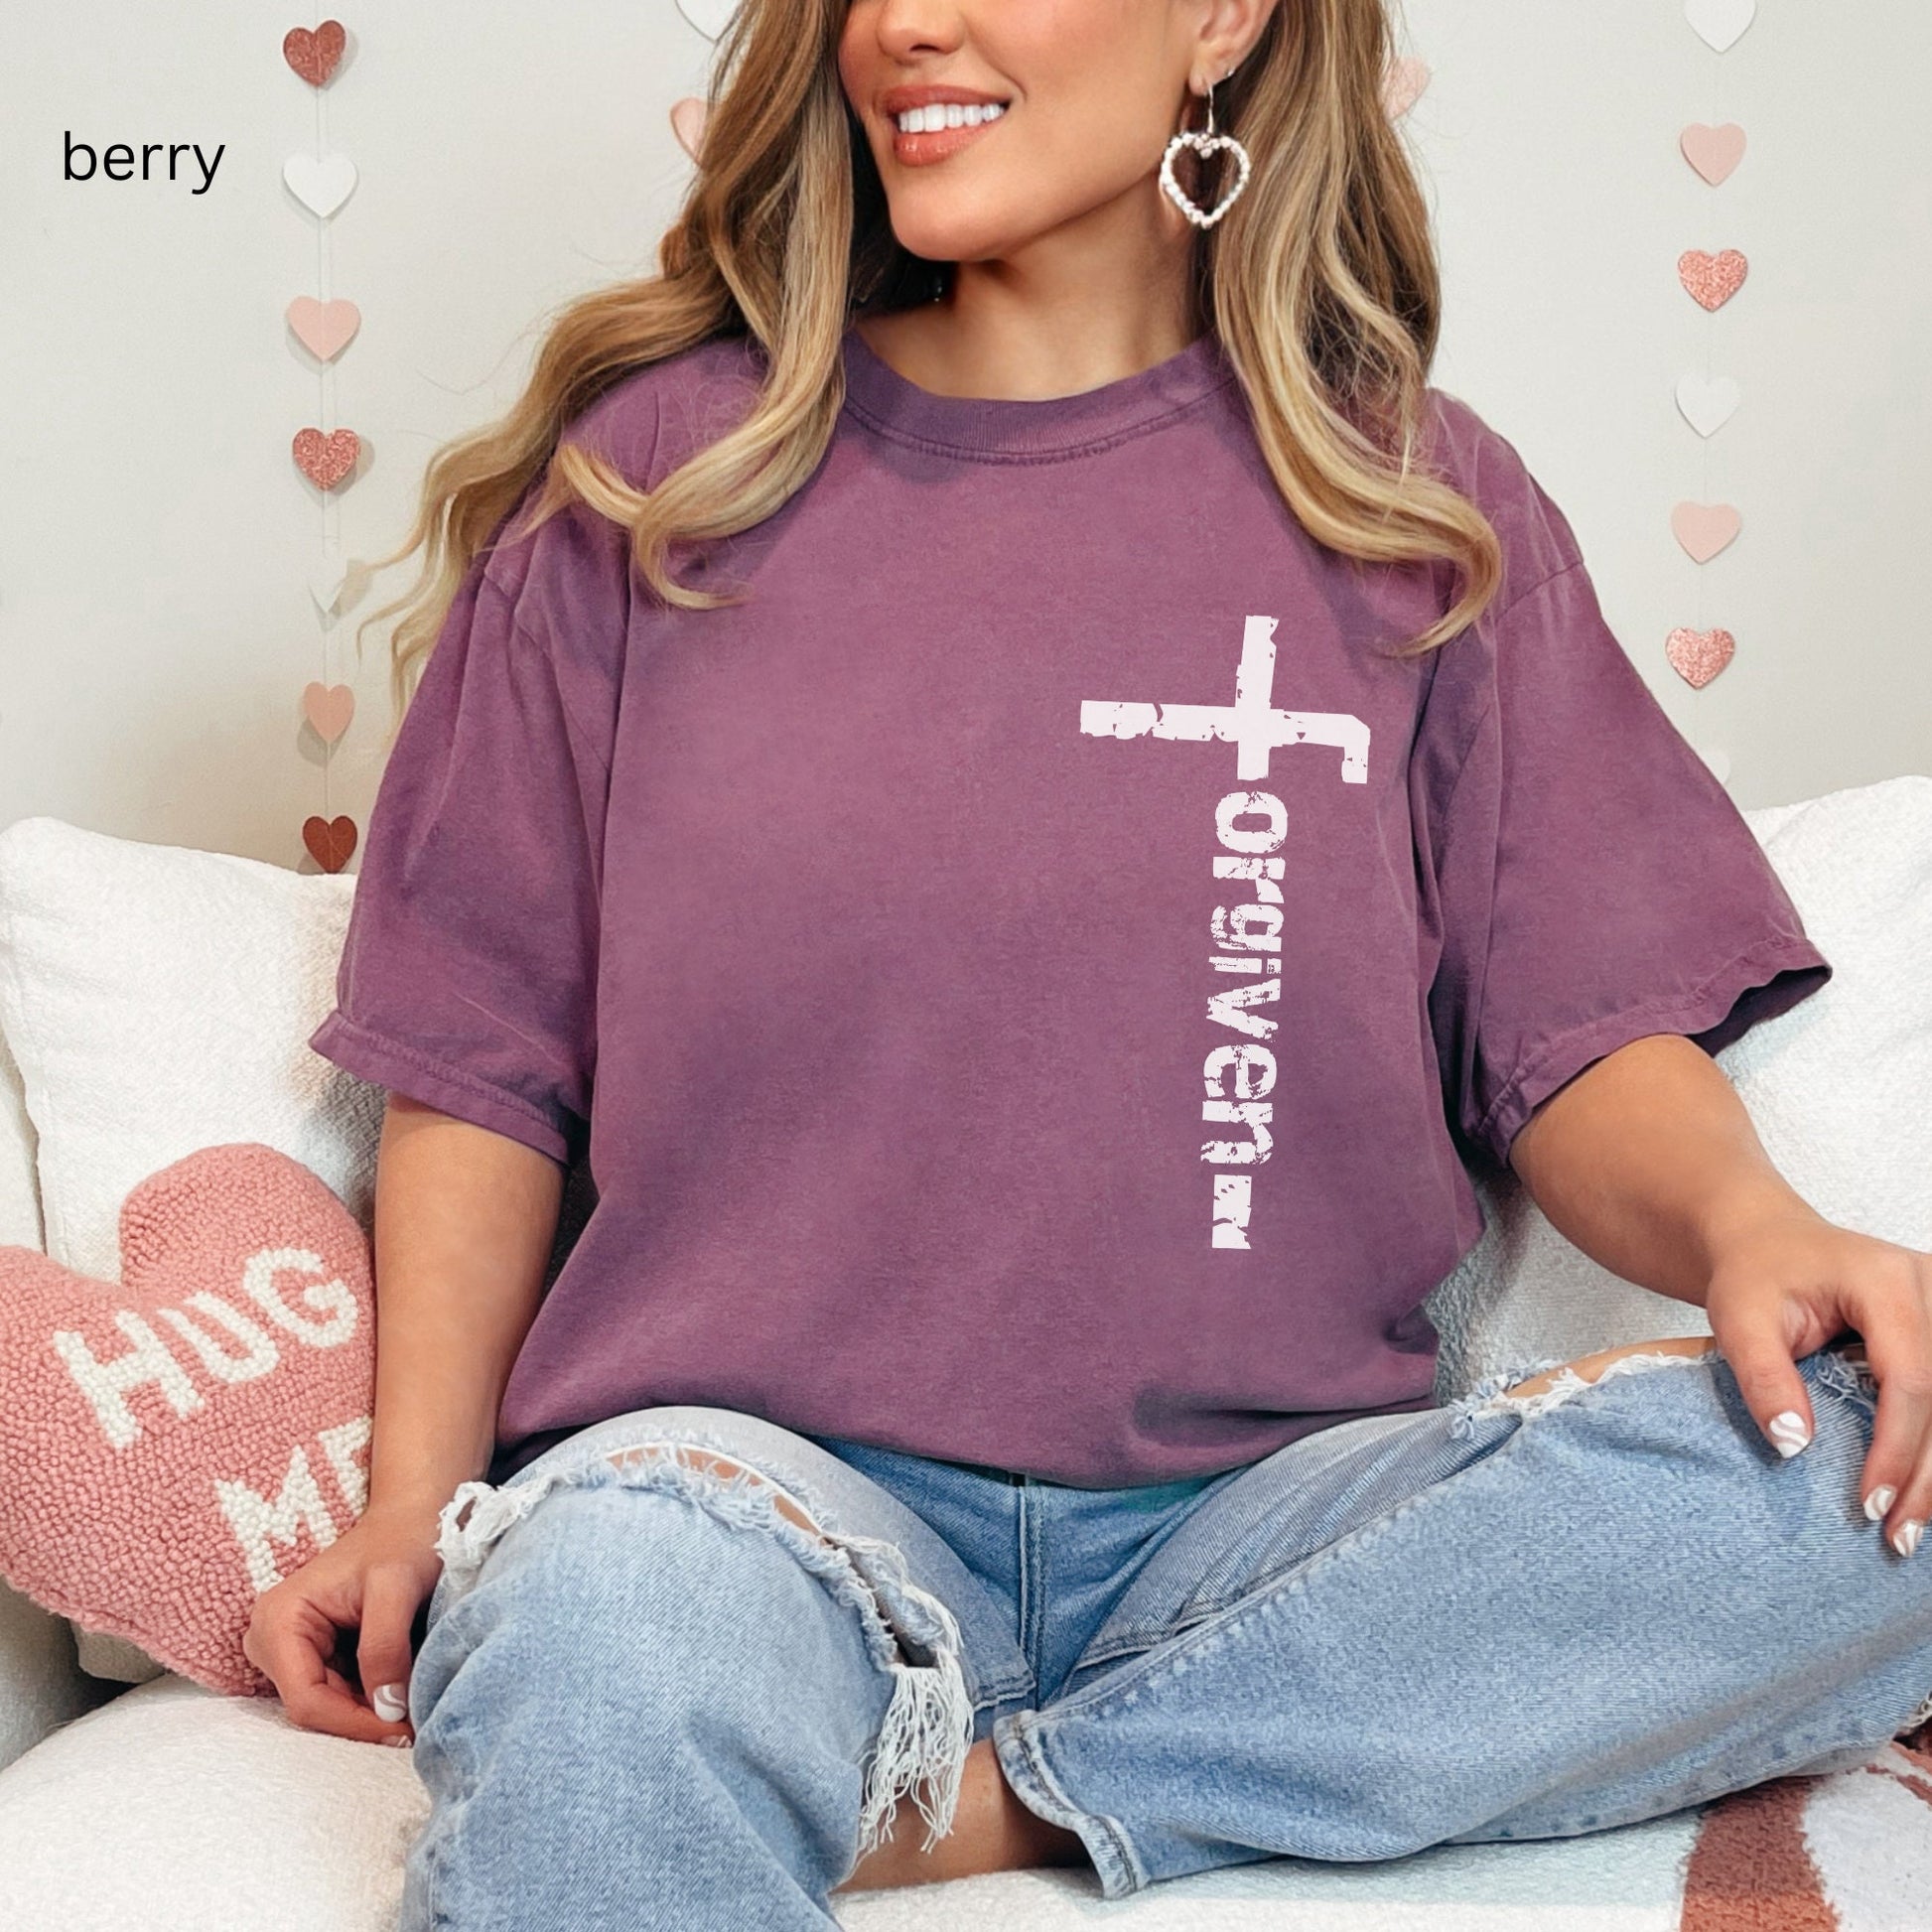 Christian grunge Bible Verse Comfort Color t-shirt in berry  color